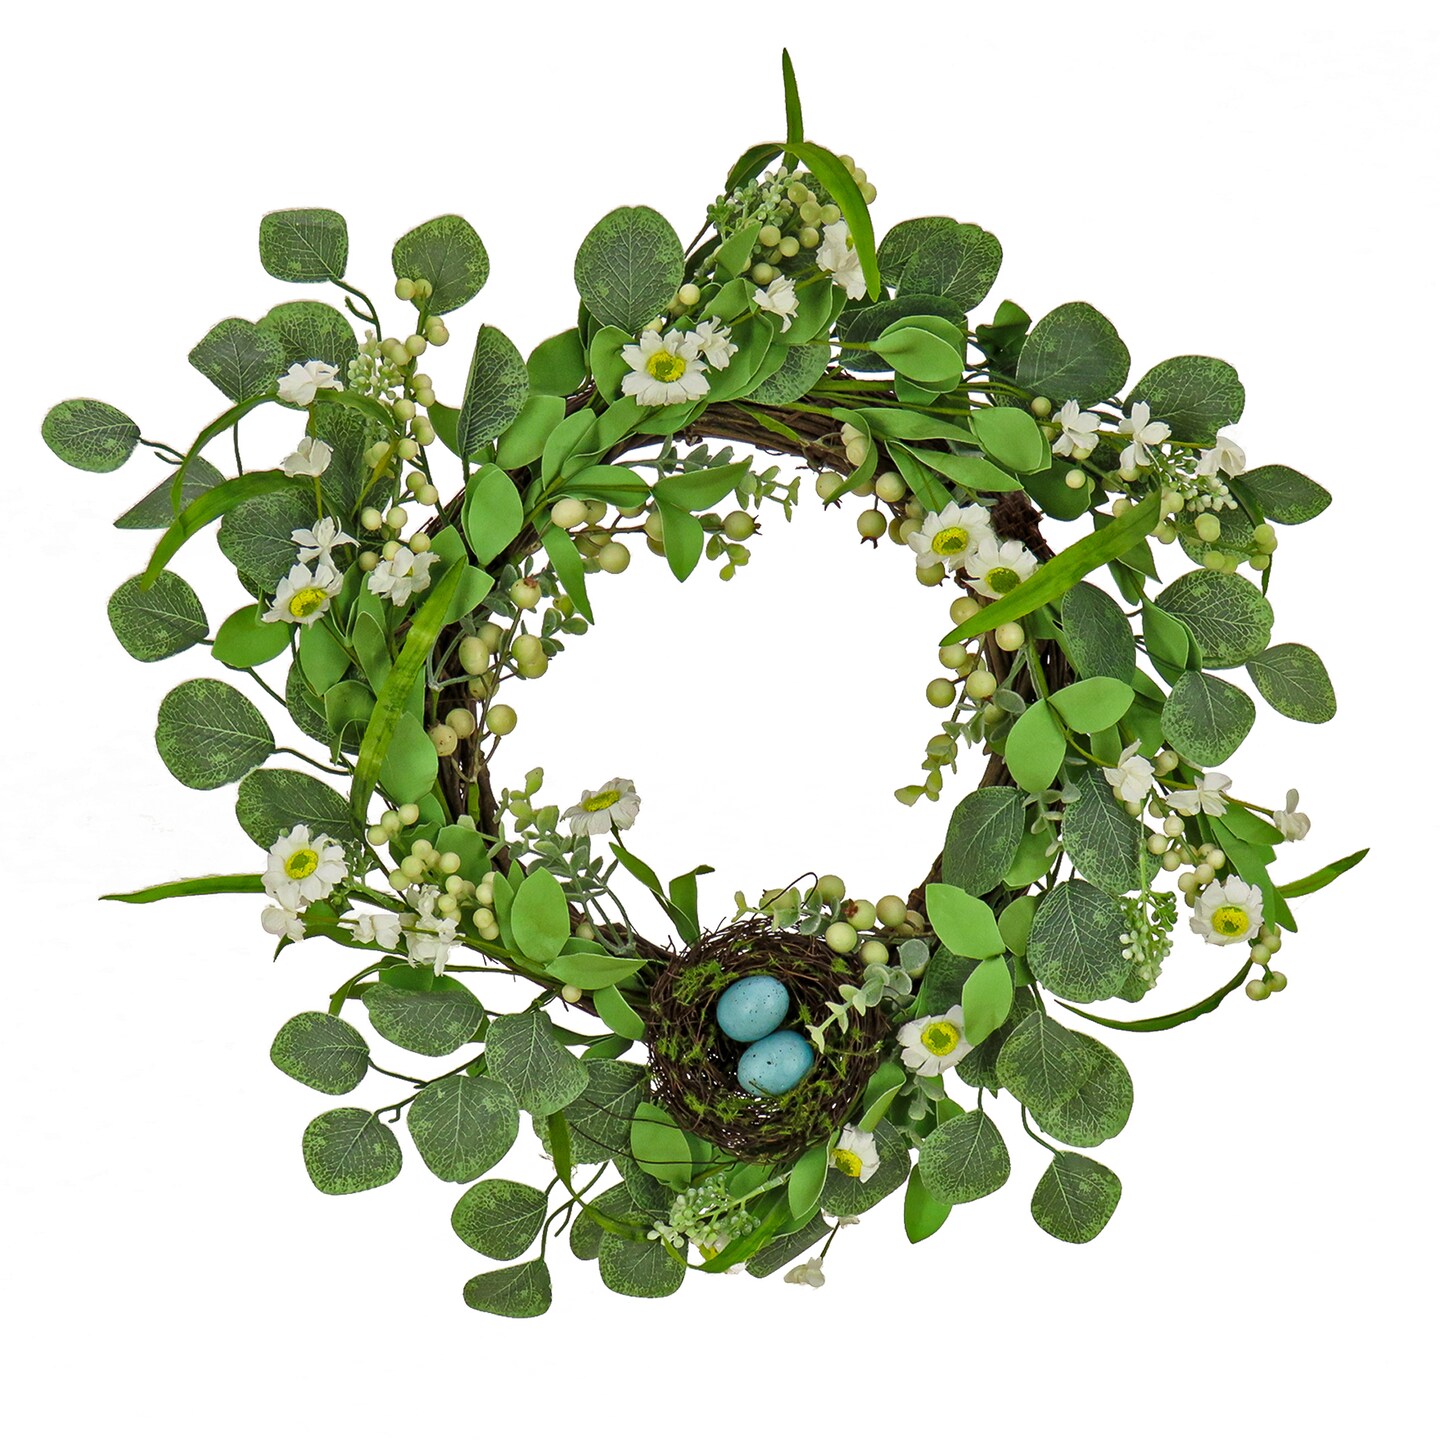 National Tree Company Artificial Spring Wreath, Woven Branch Base, Decorated with Spring Blooms, Berries, Bird&#x27;s Nest with Pastel Eggs, Spring Collection, 20 Inches